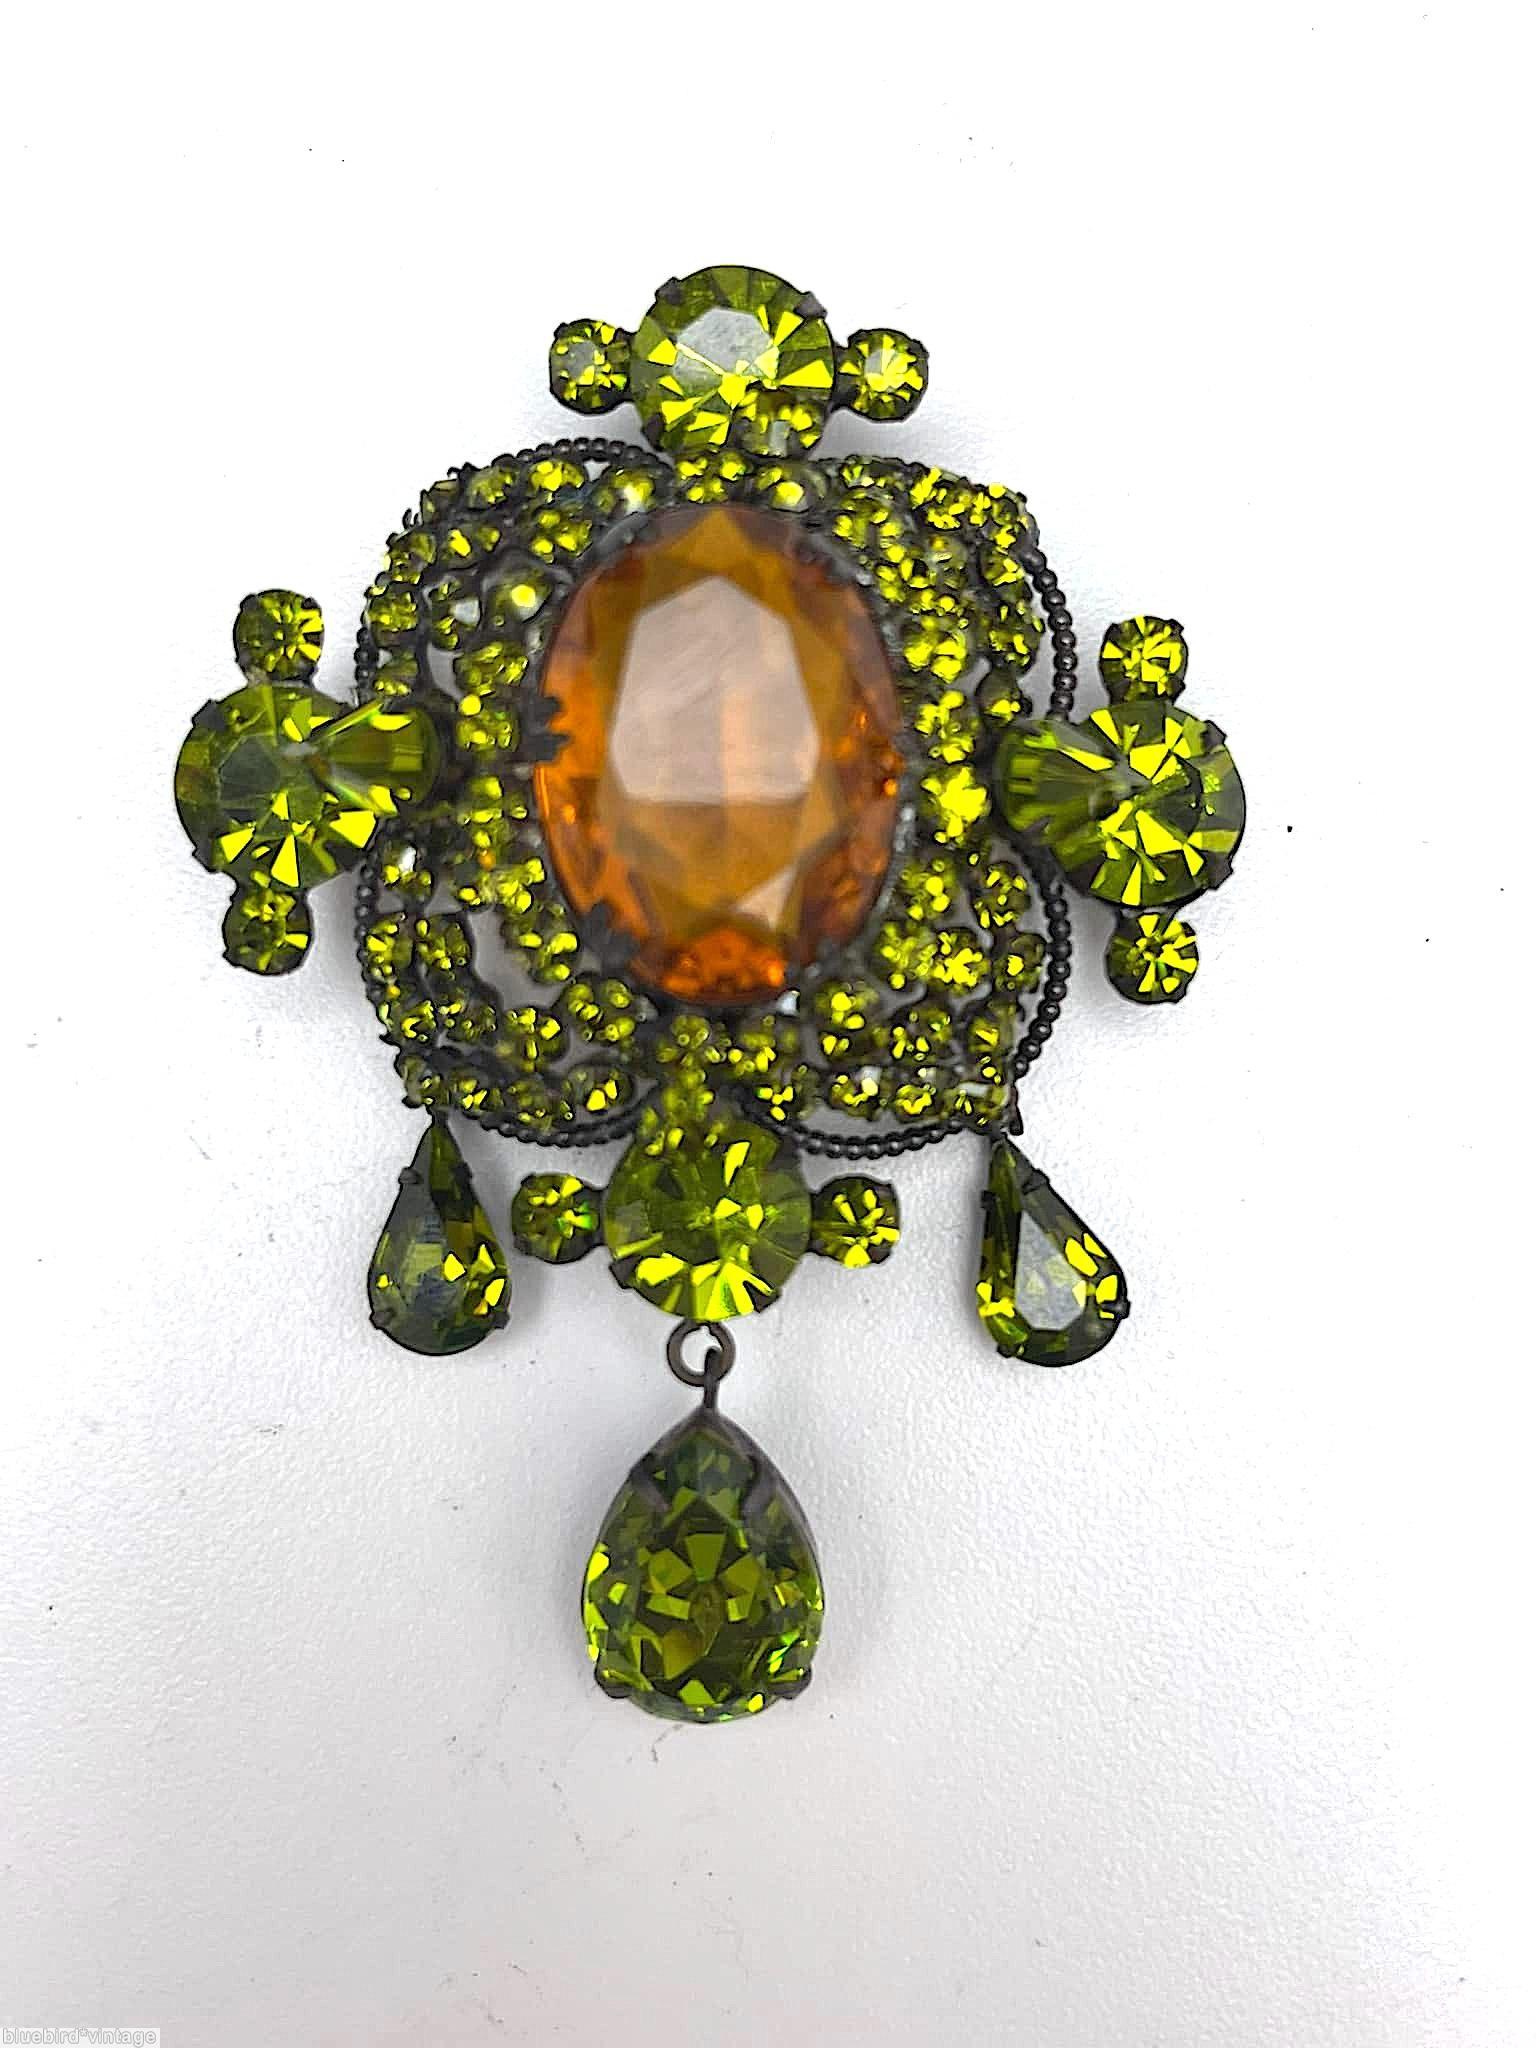 Schreiner 3 dangle top down pin large oval cab center top surrounding 3 round small stone in 4 wired pedal 4 large chaton large oval faceted topaz center neon peridot jewelry